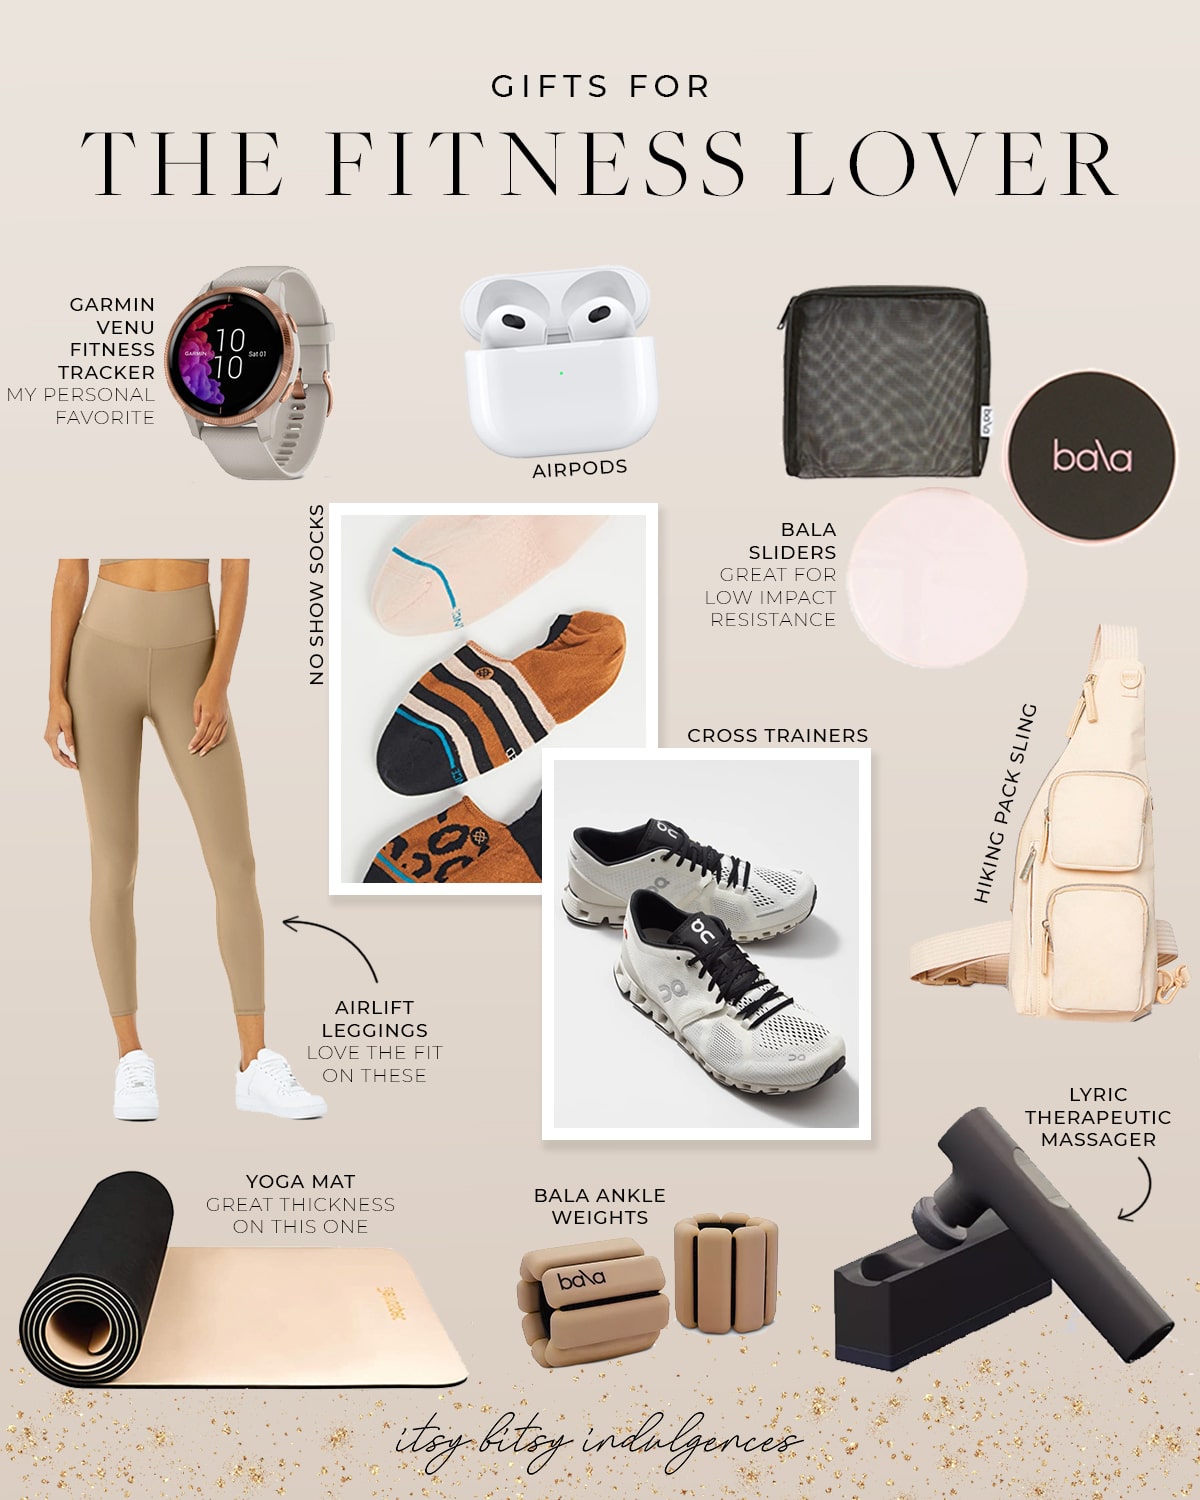 Gift guide for the fitness lover. These are the perfect gifts for